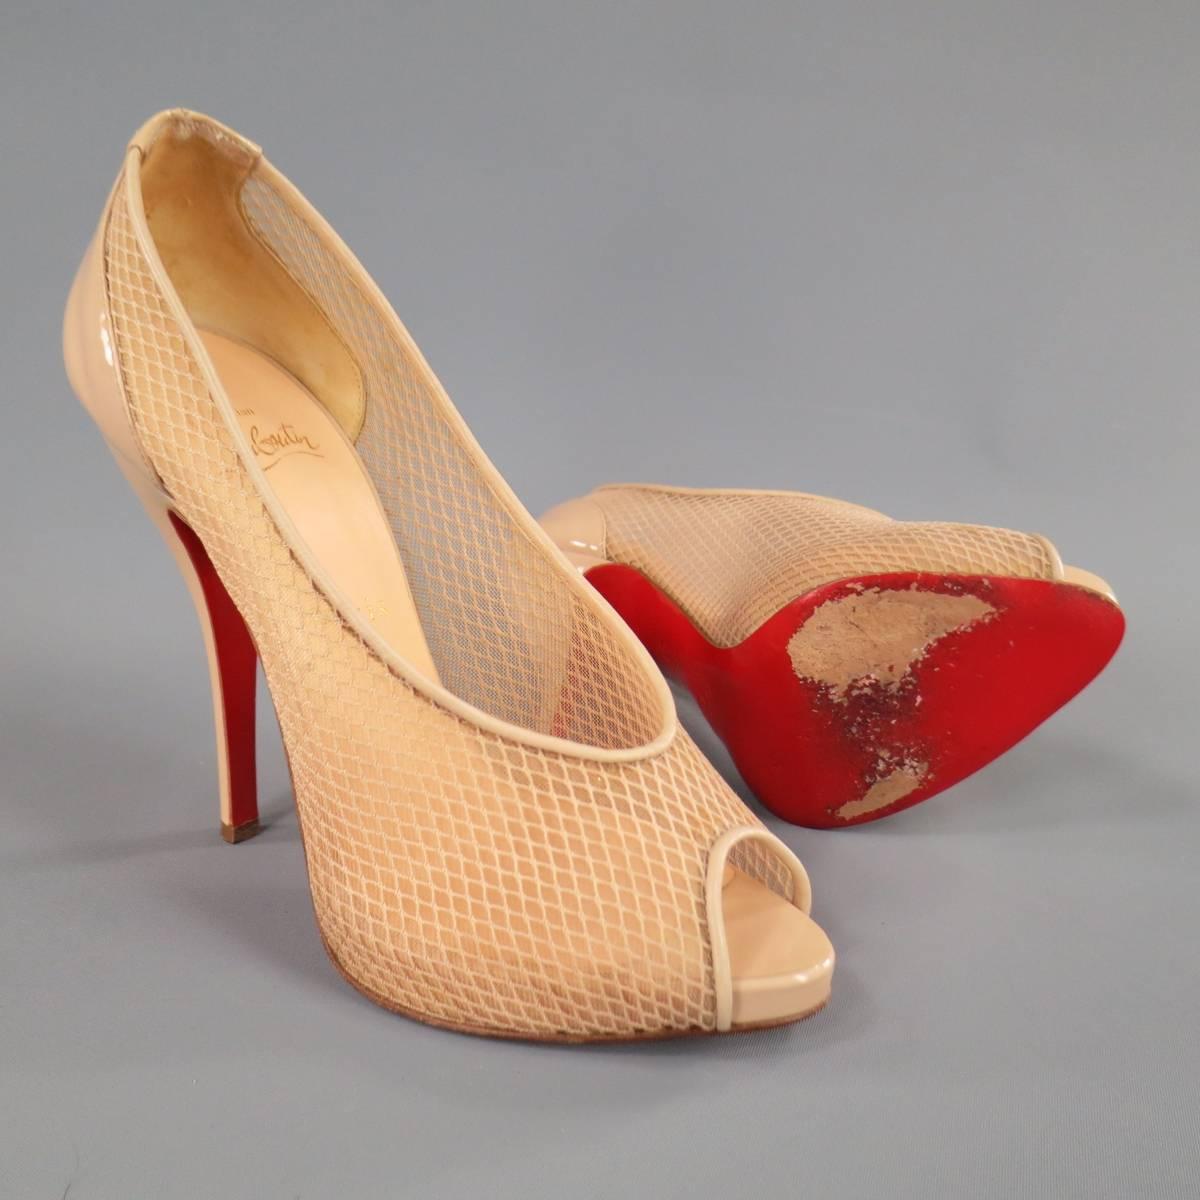 These fabulous CHRISTIAN LOUBOUTIN "Fetilo" pumps come in "nude" beige tulle with a mesh overlay and feature leather piping, peep toe with concealed platform, and patent leather curved stiletto heel. Made in Italy. Retails at